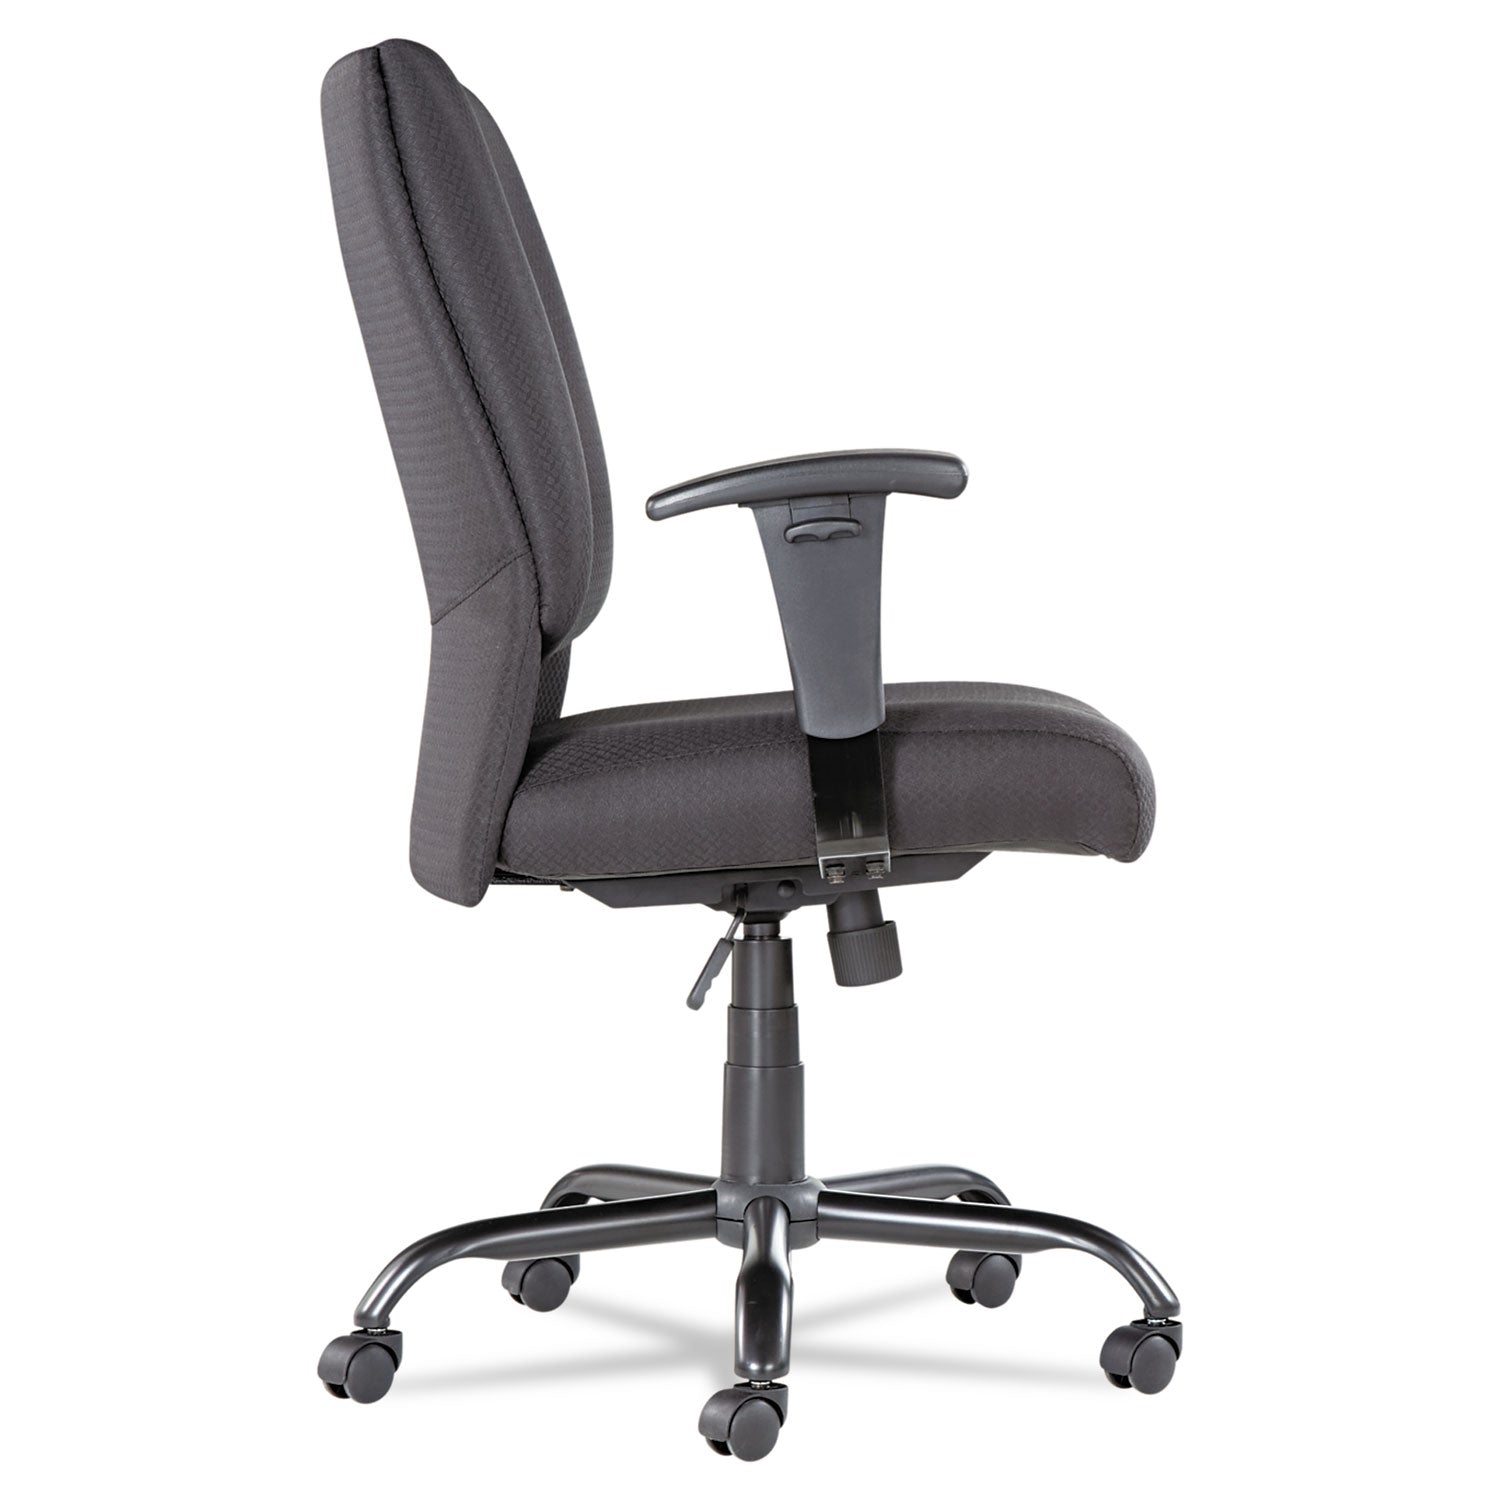 Big/Tall Swivel/Tilt Mid-Back Chair, Supports Up to 450 lb, 19.29" to 23.22" Seat Height, Black - 